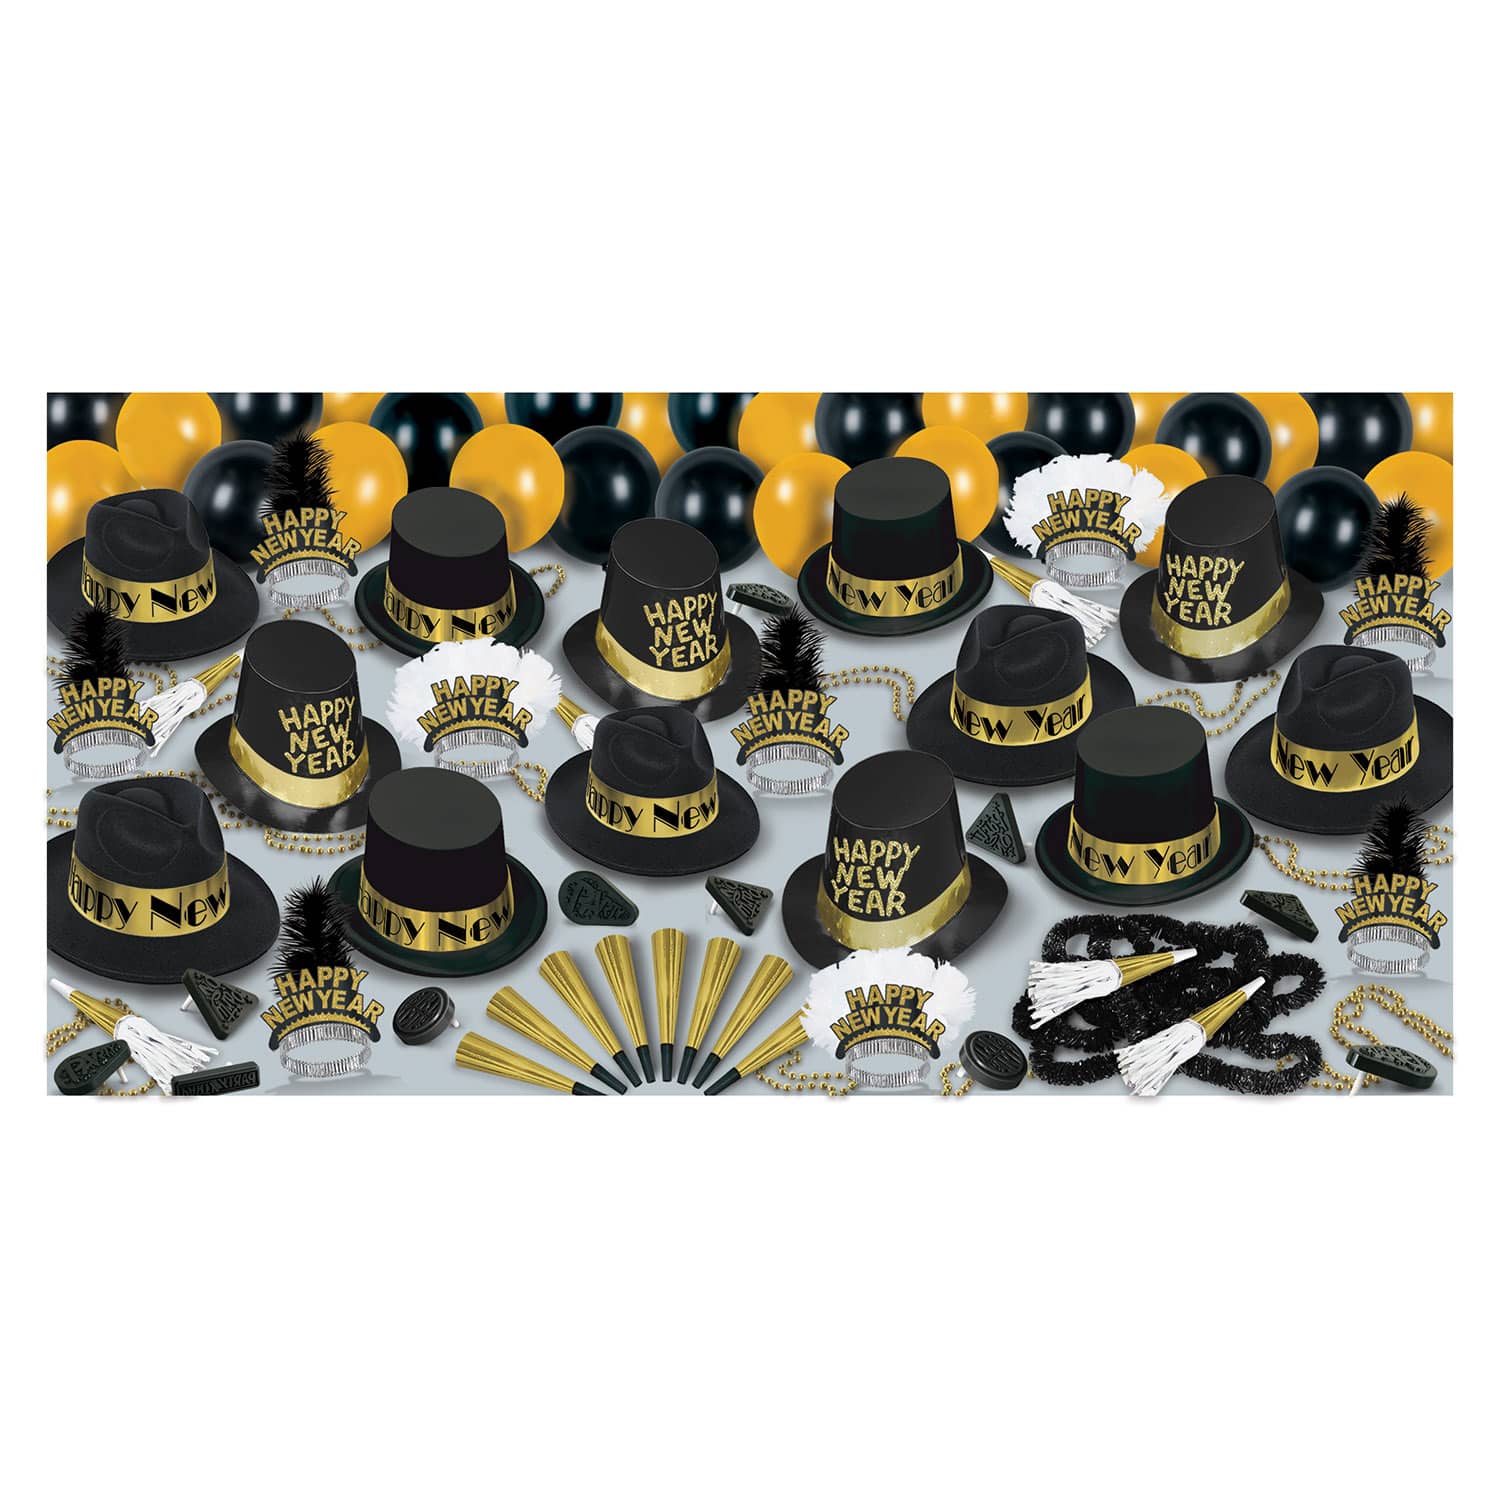 large assortment of new years eve party supplies that includes black and gold party hats, balloons, tiaras, horns, and noisemakers